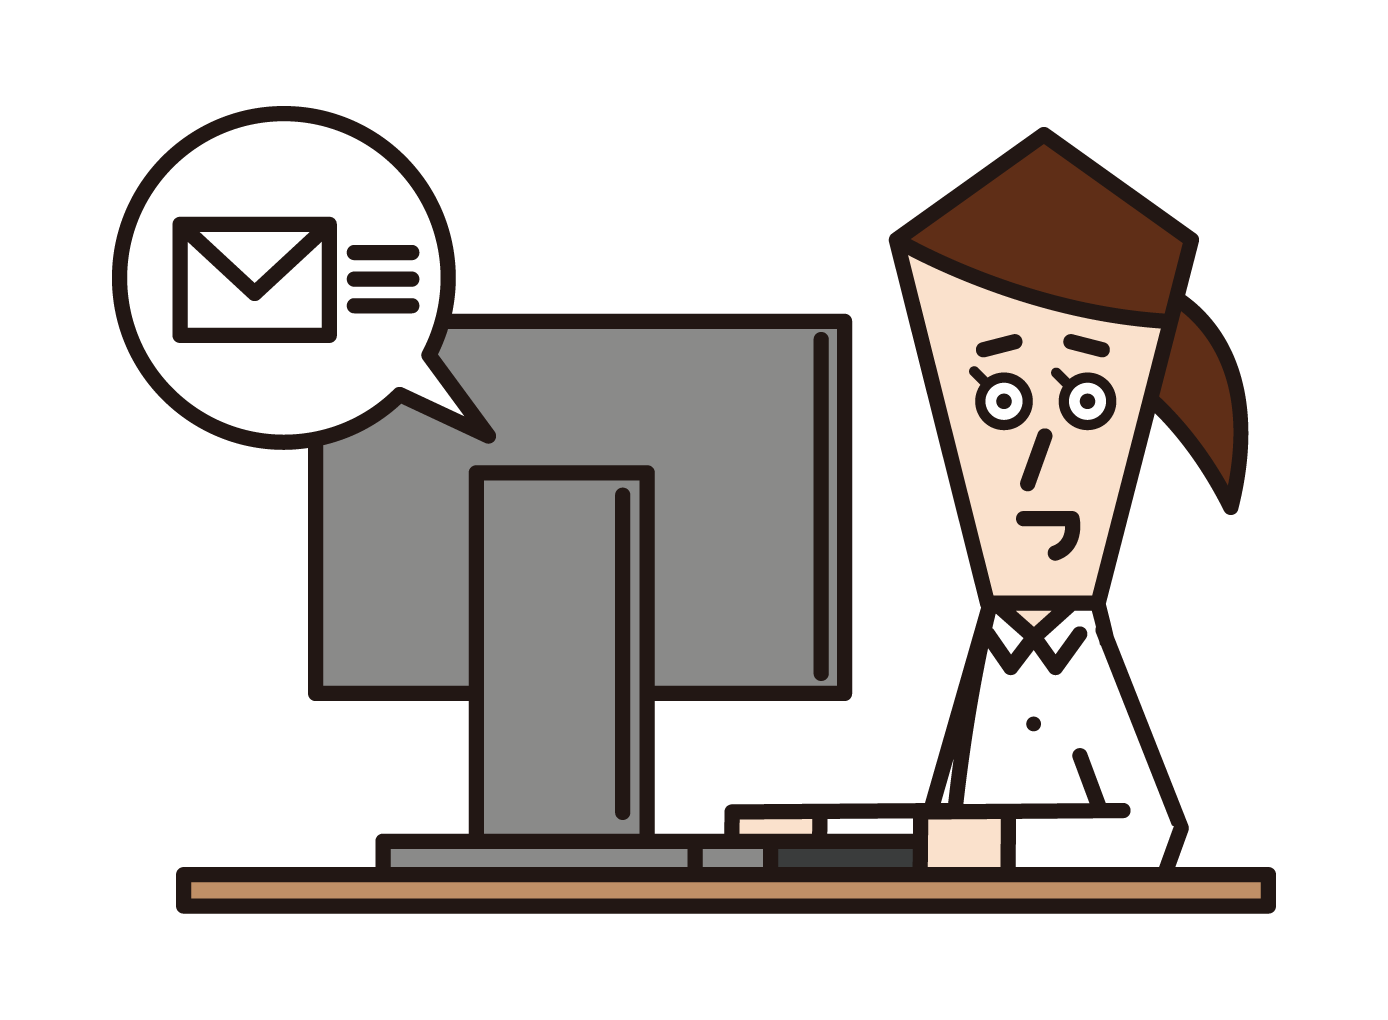 Illustration of a woman sending an e-mail on a computer